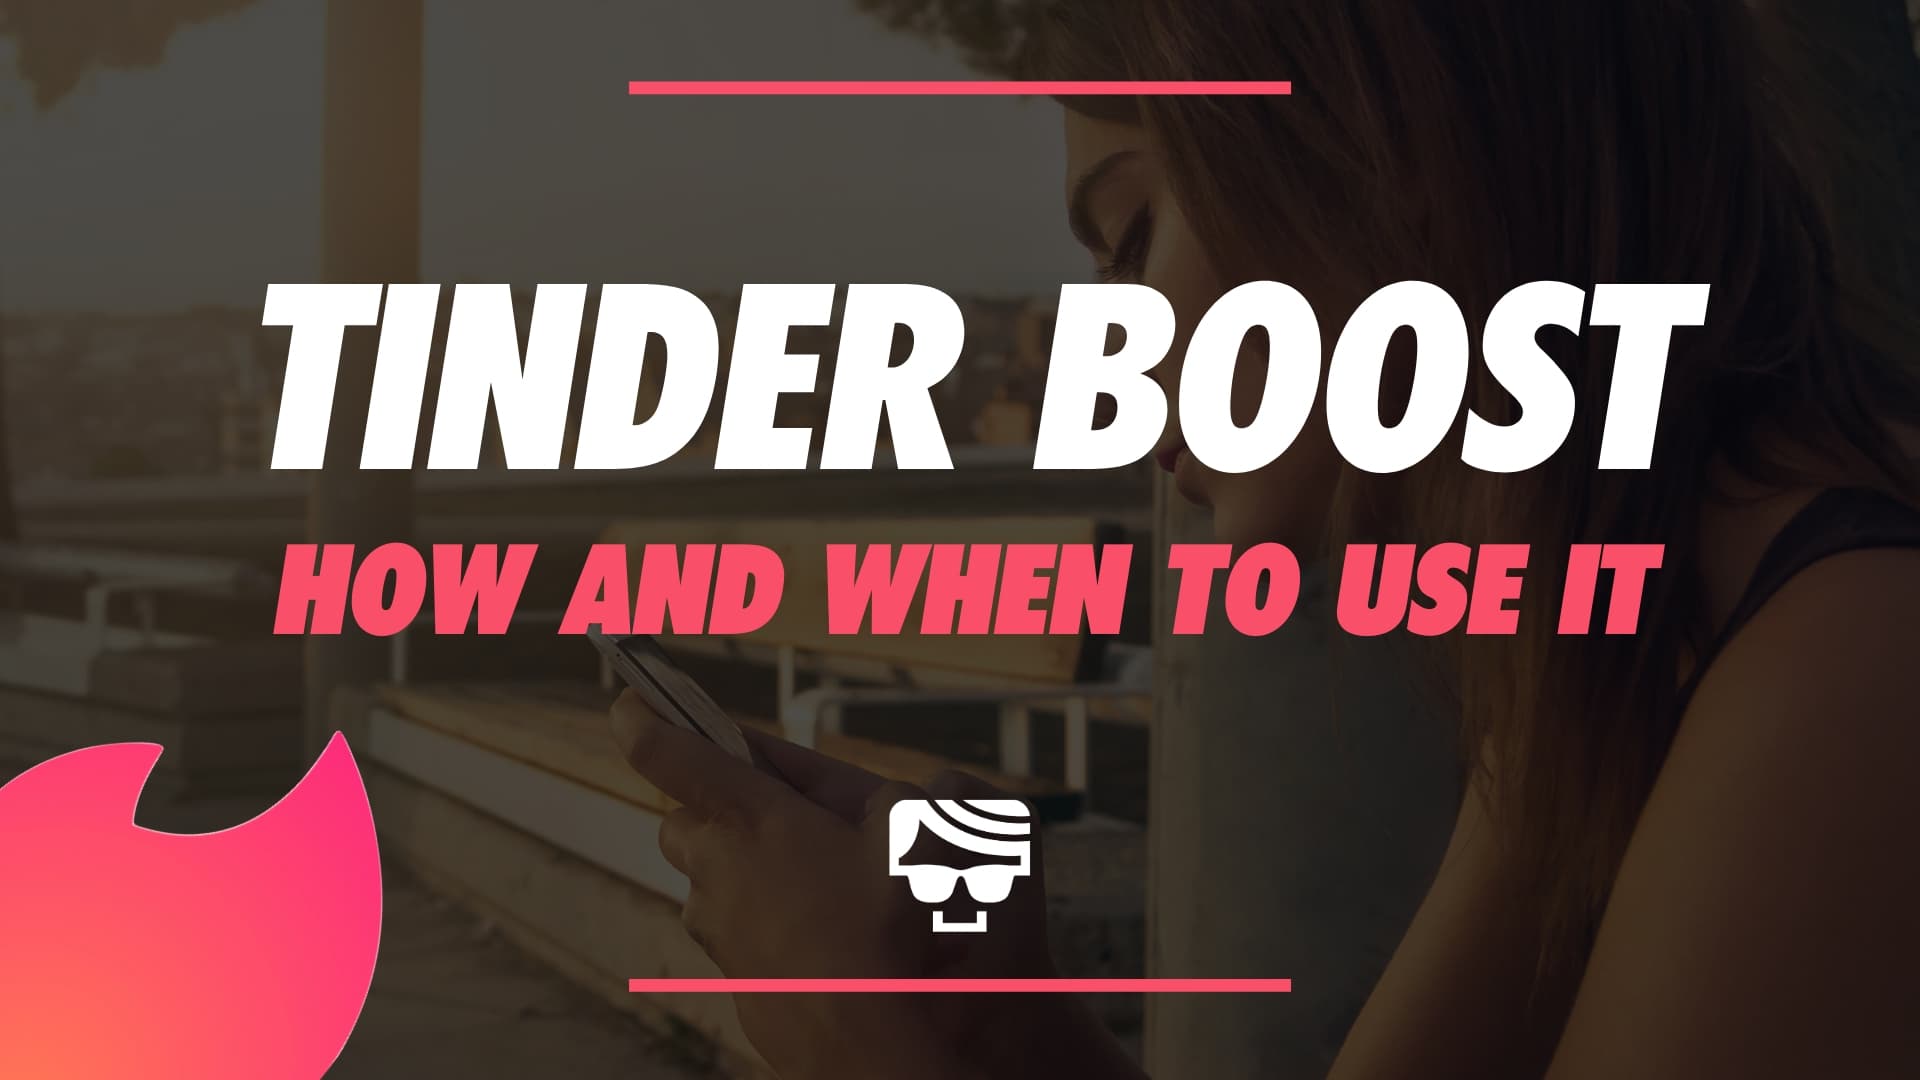 Tinder Boost Explained: 2022 Pricing, What It Is & When To Do It (+ Super)